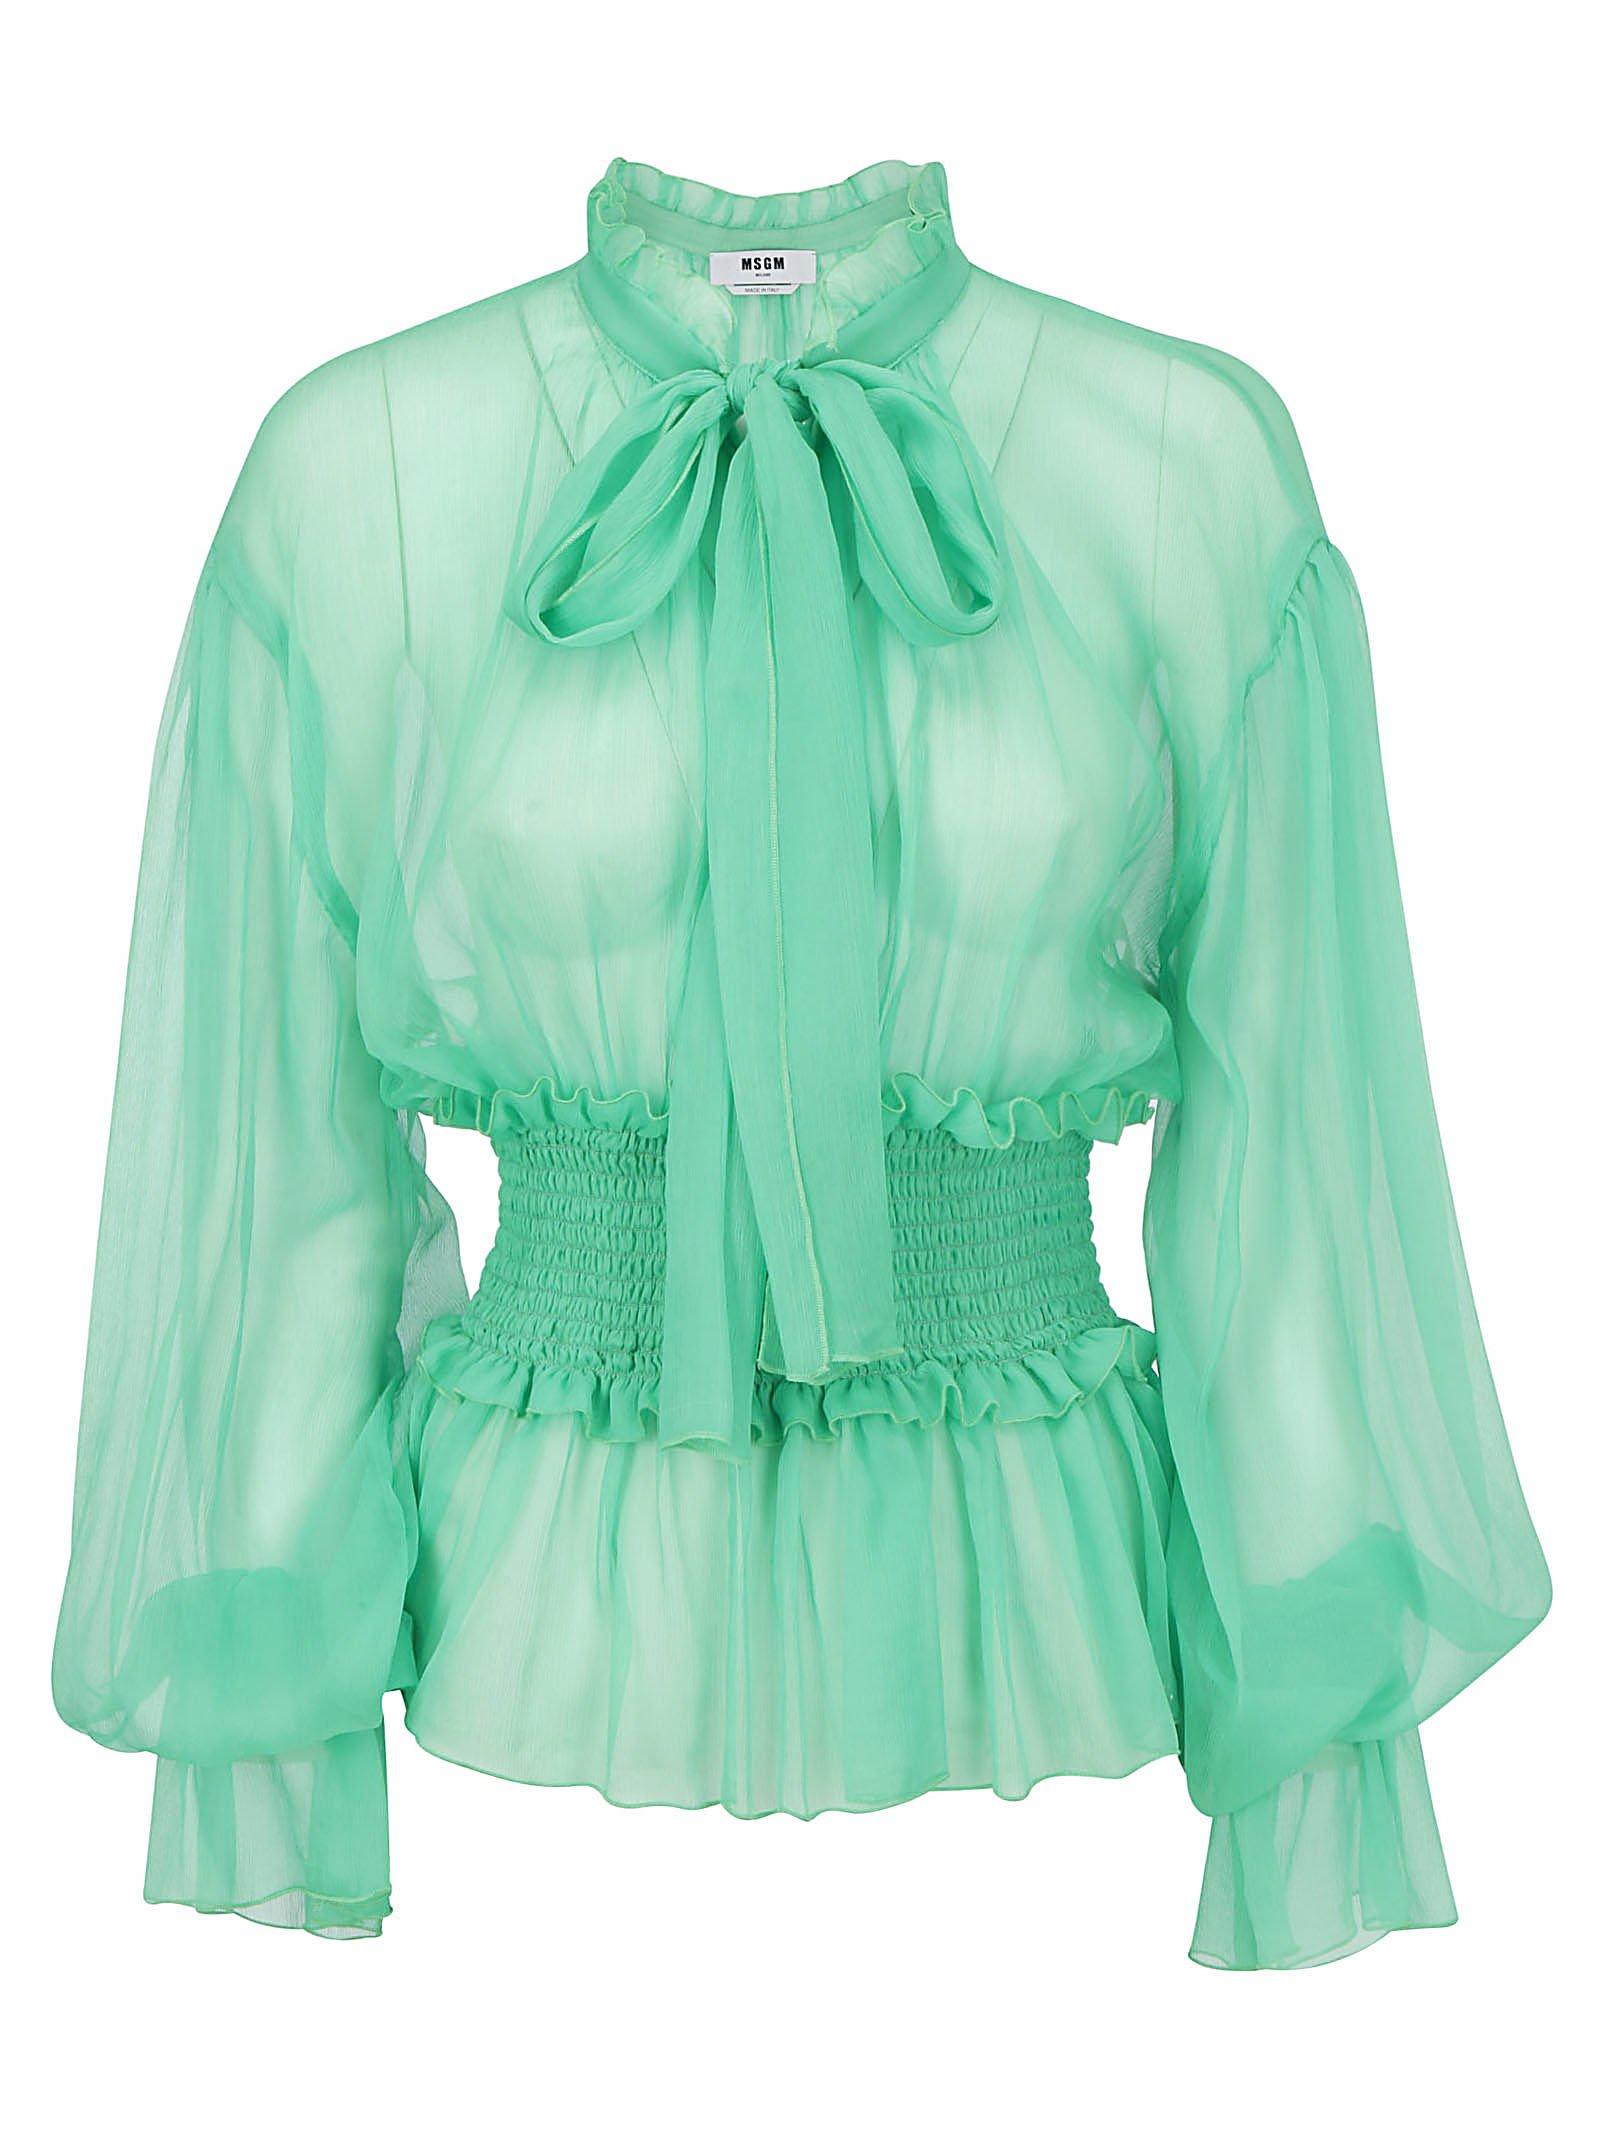 MSGM Silk Pussy Bow Ruffled Blouse in Green - Lyst